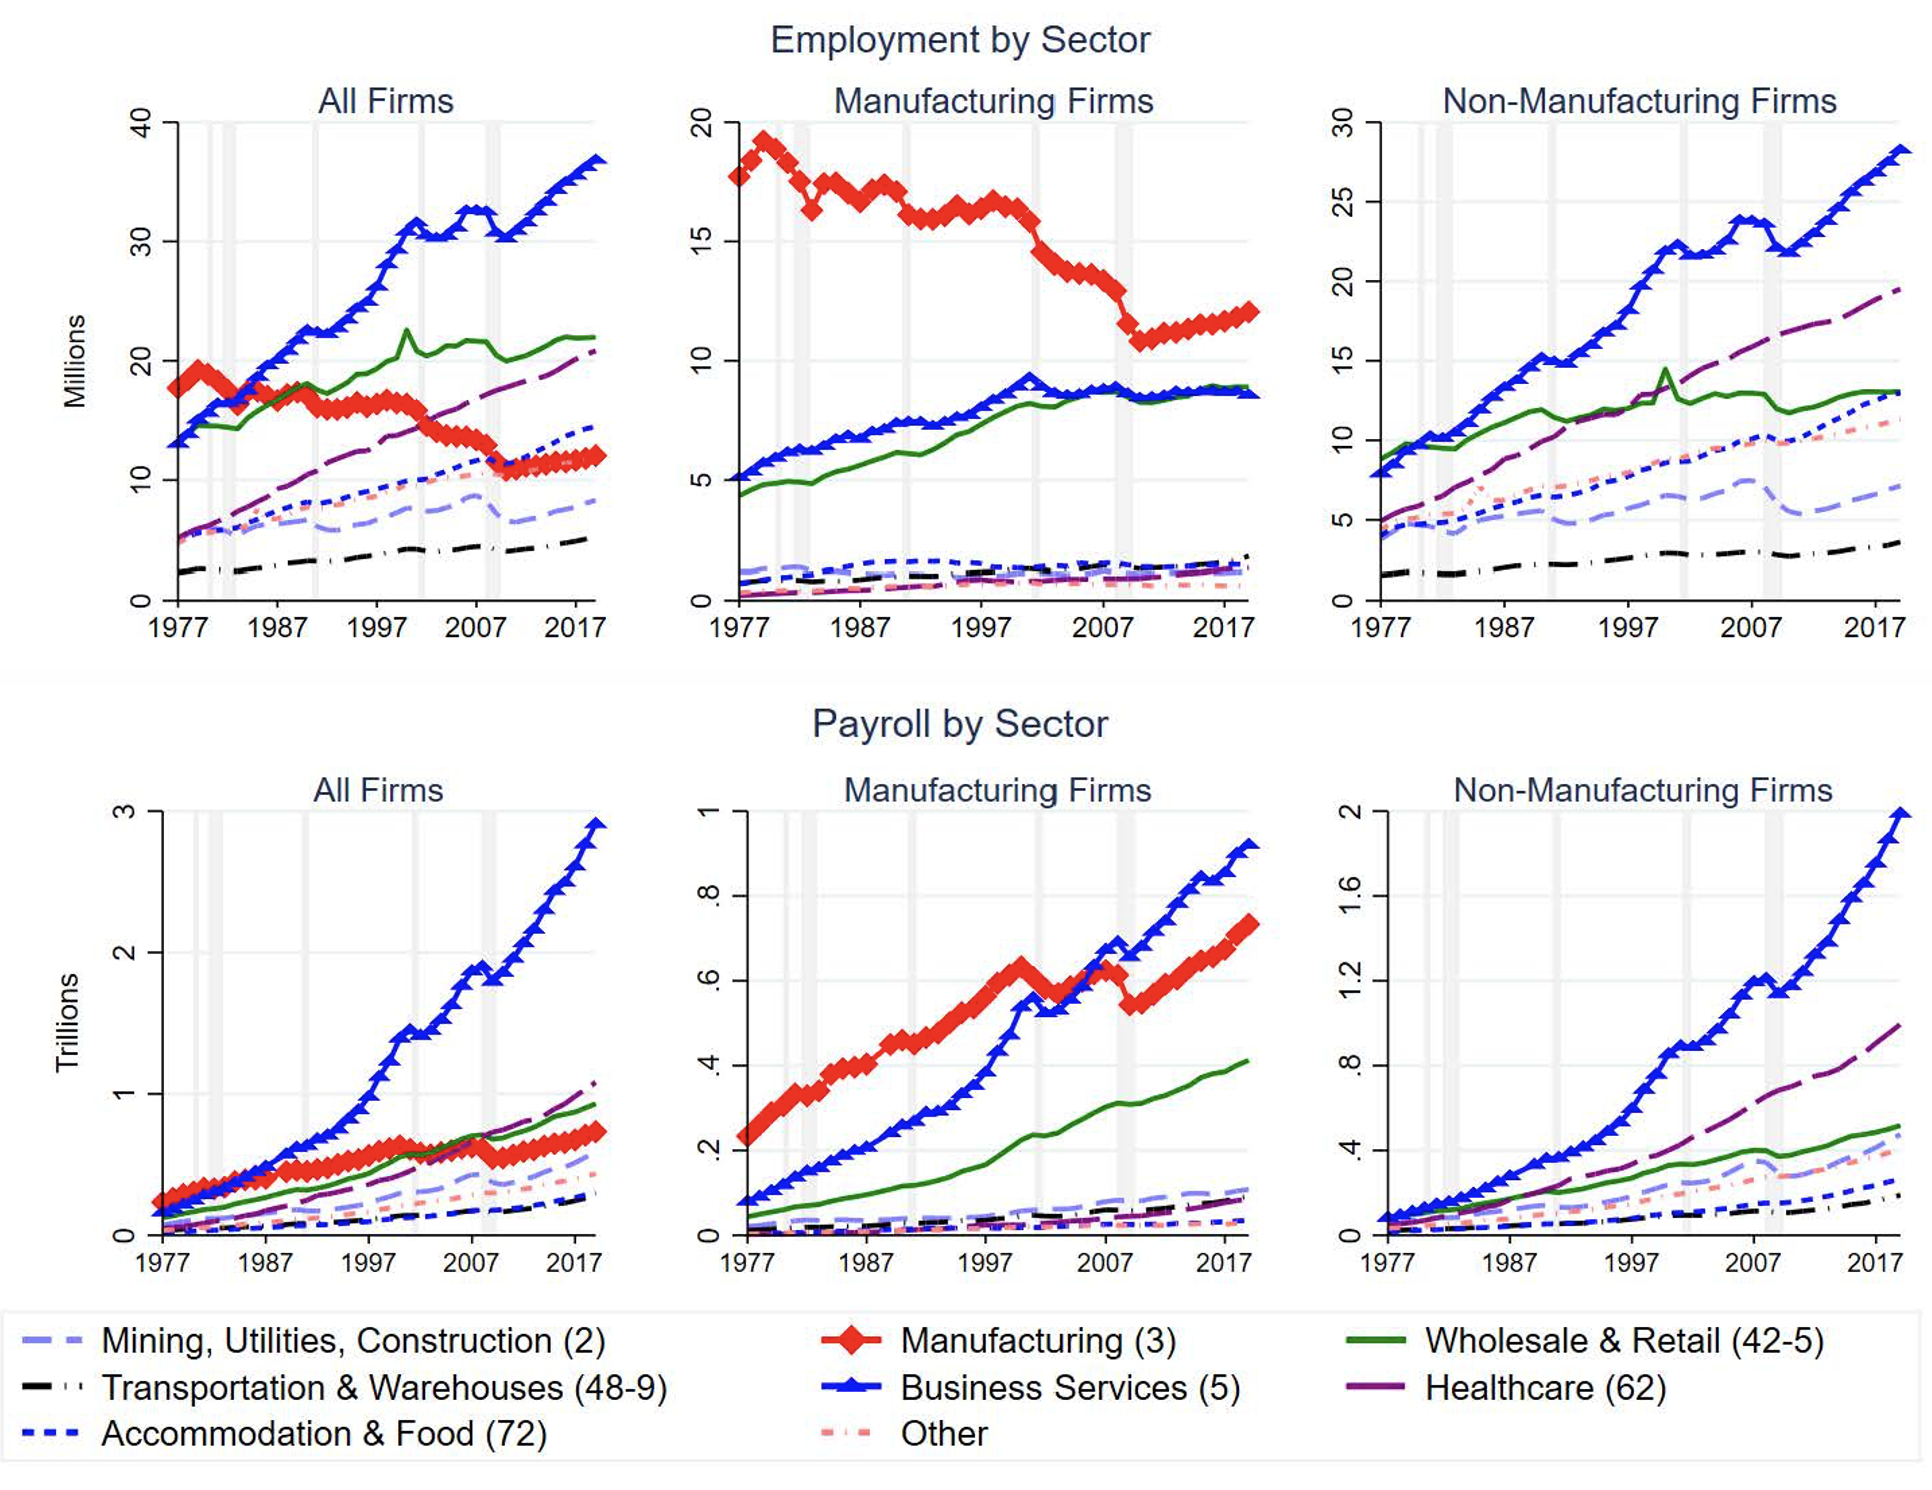 US employment and payroll by sector and firm type